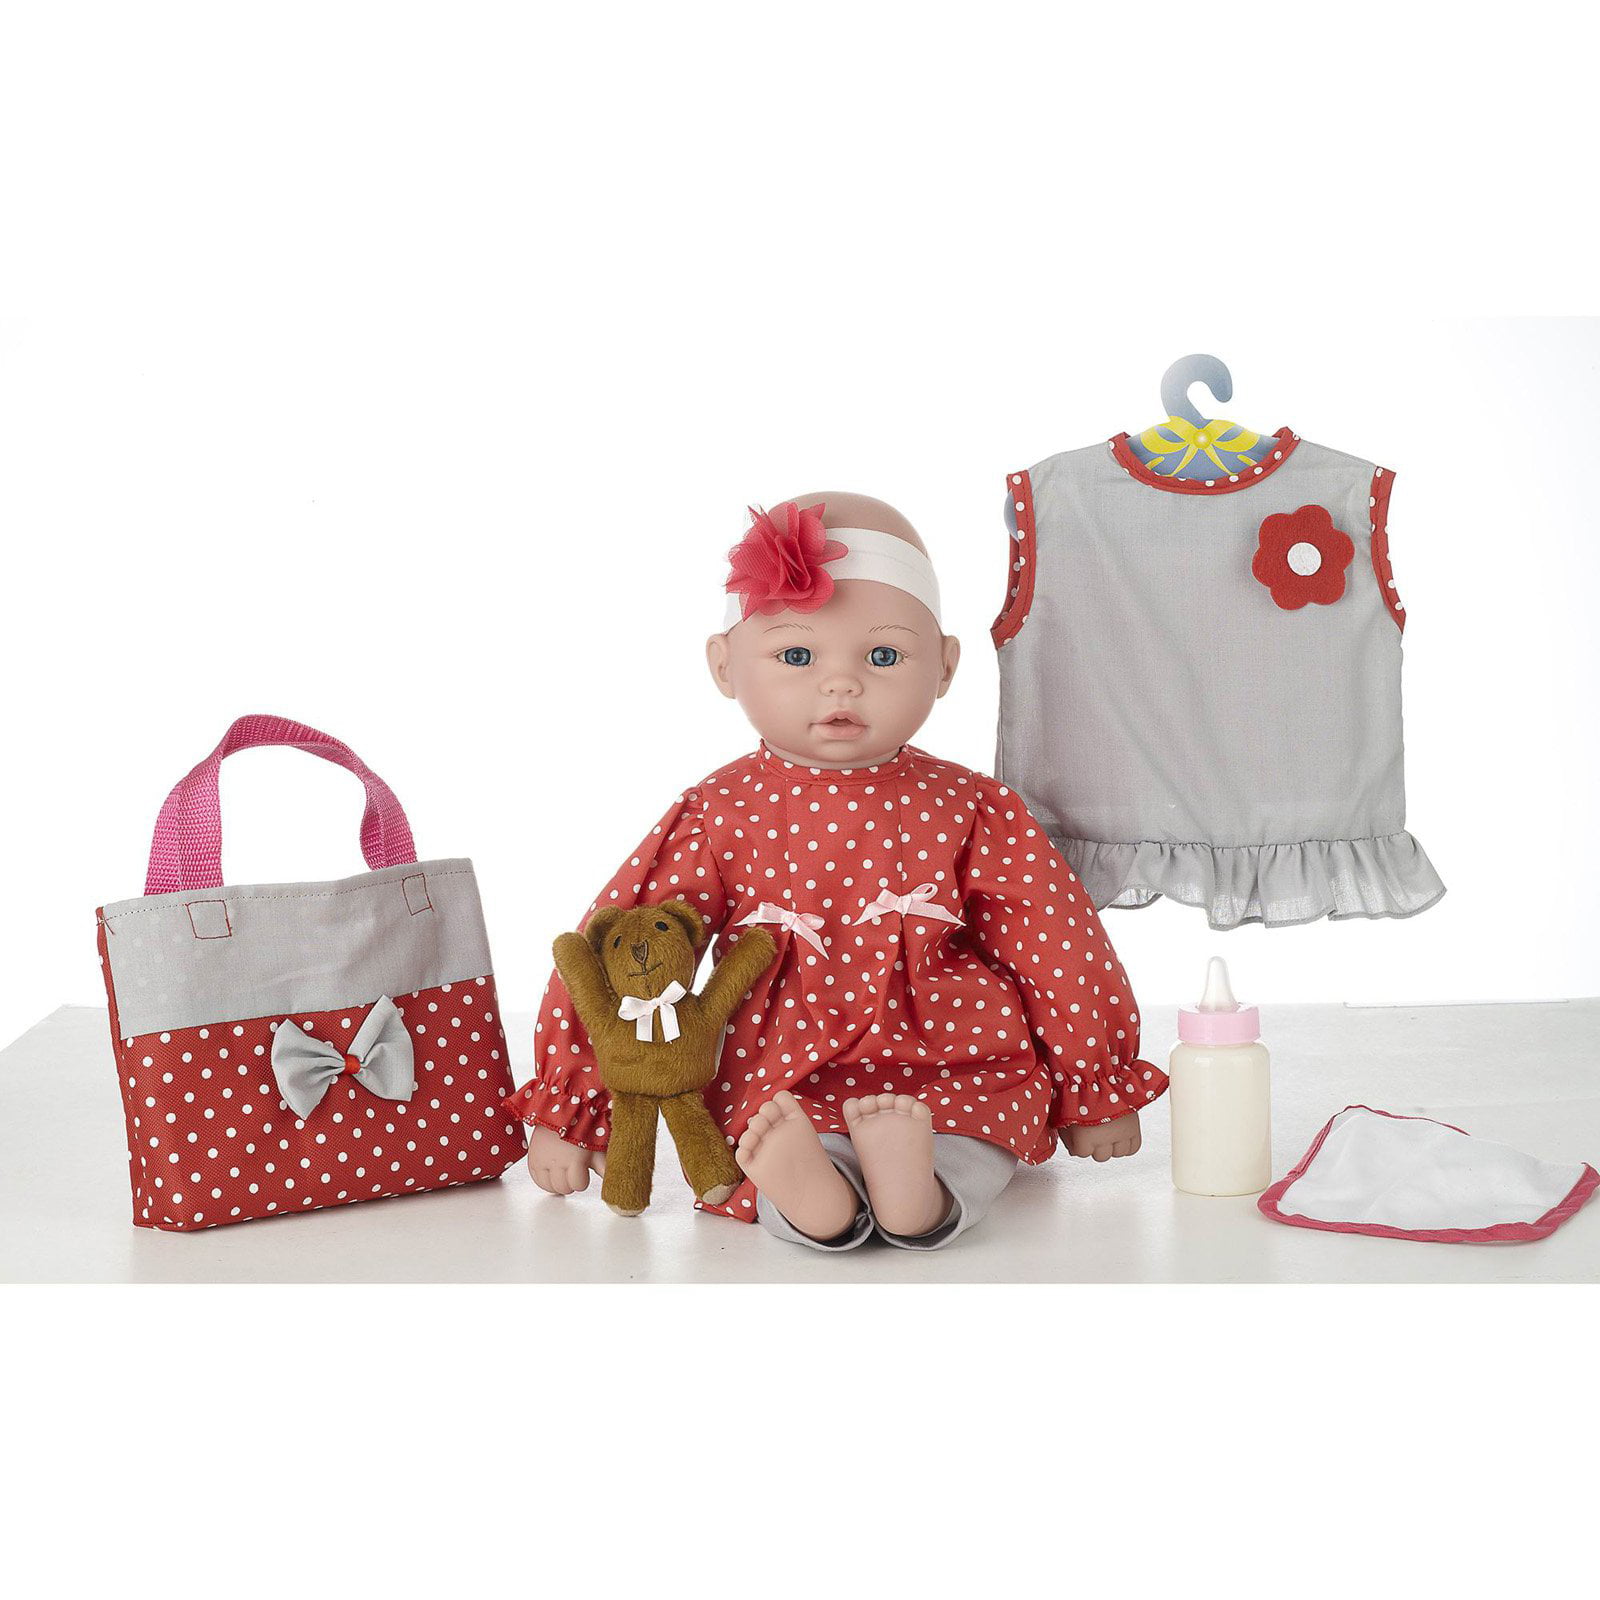 Baby Emma Doll With Accessories and Plush Toy Kids Xmas Gift Playset Kingstate